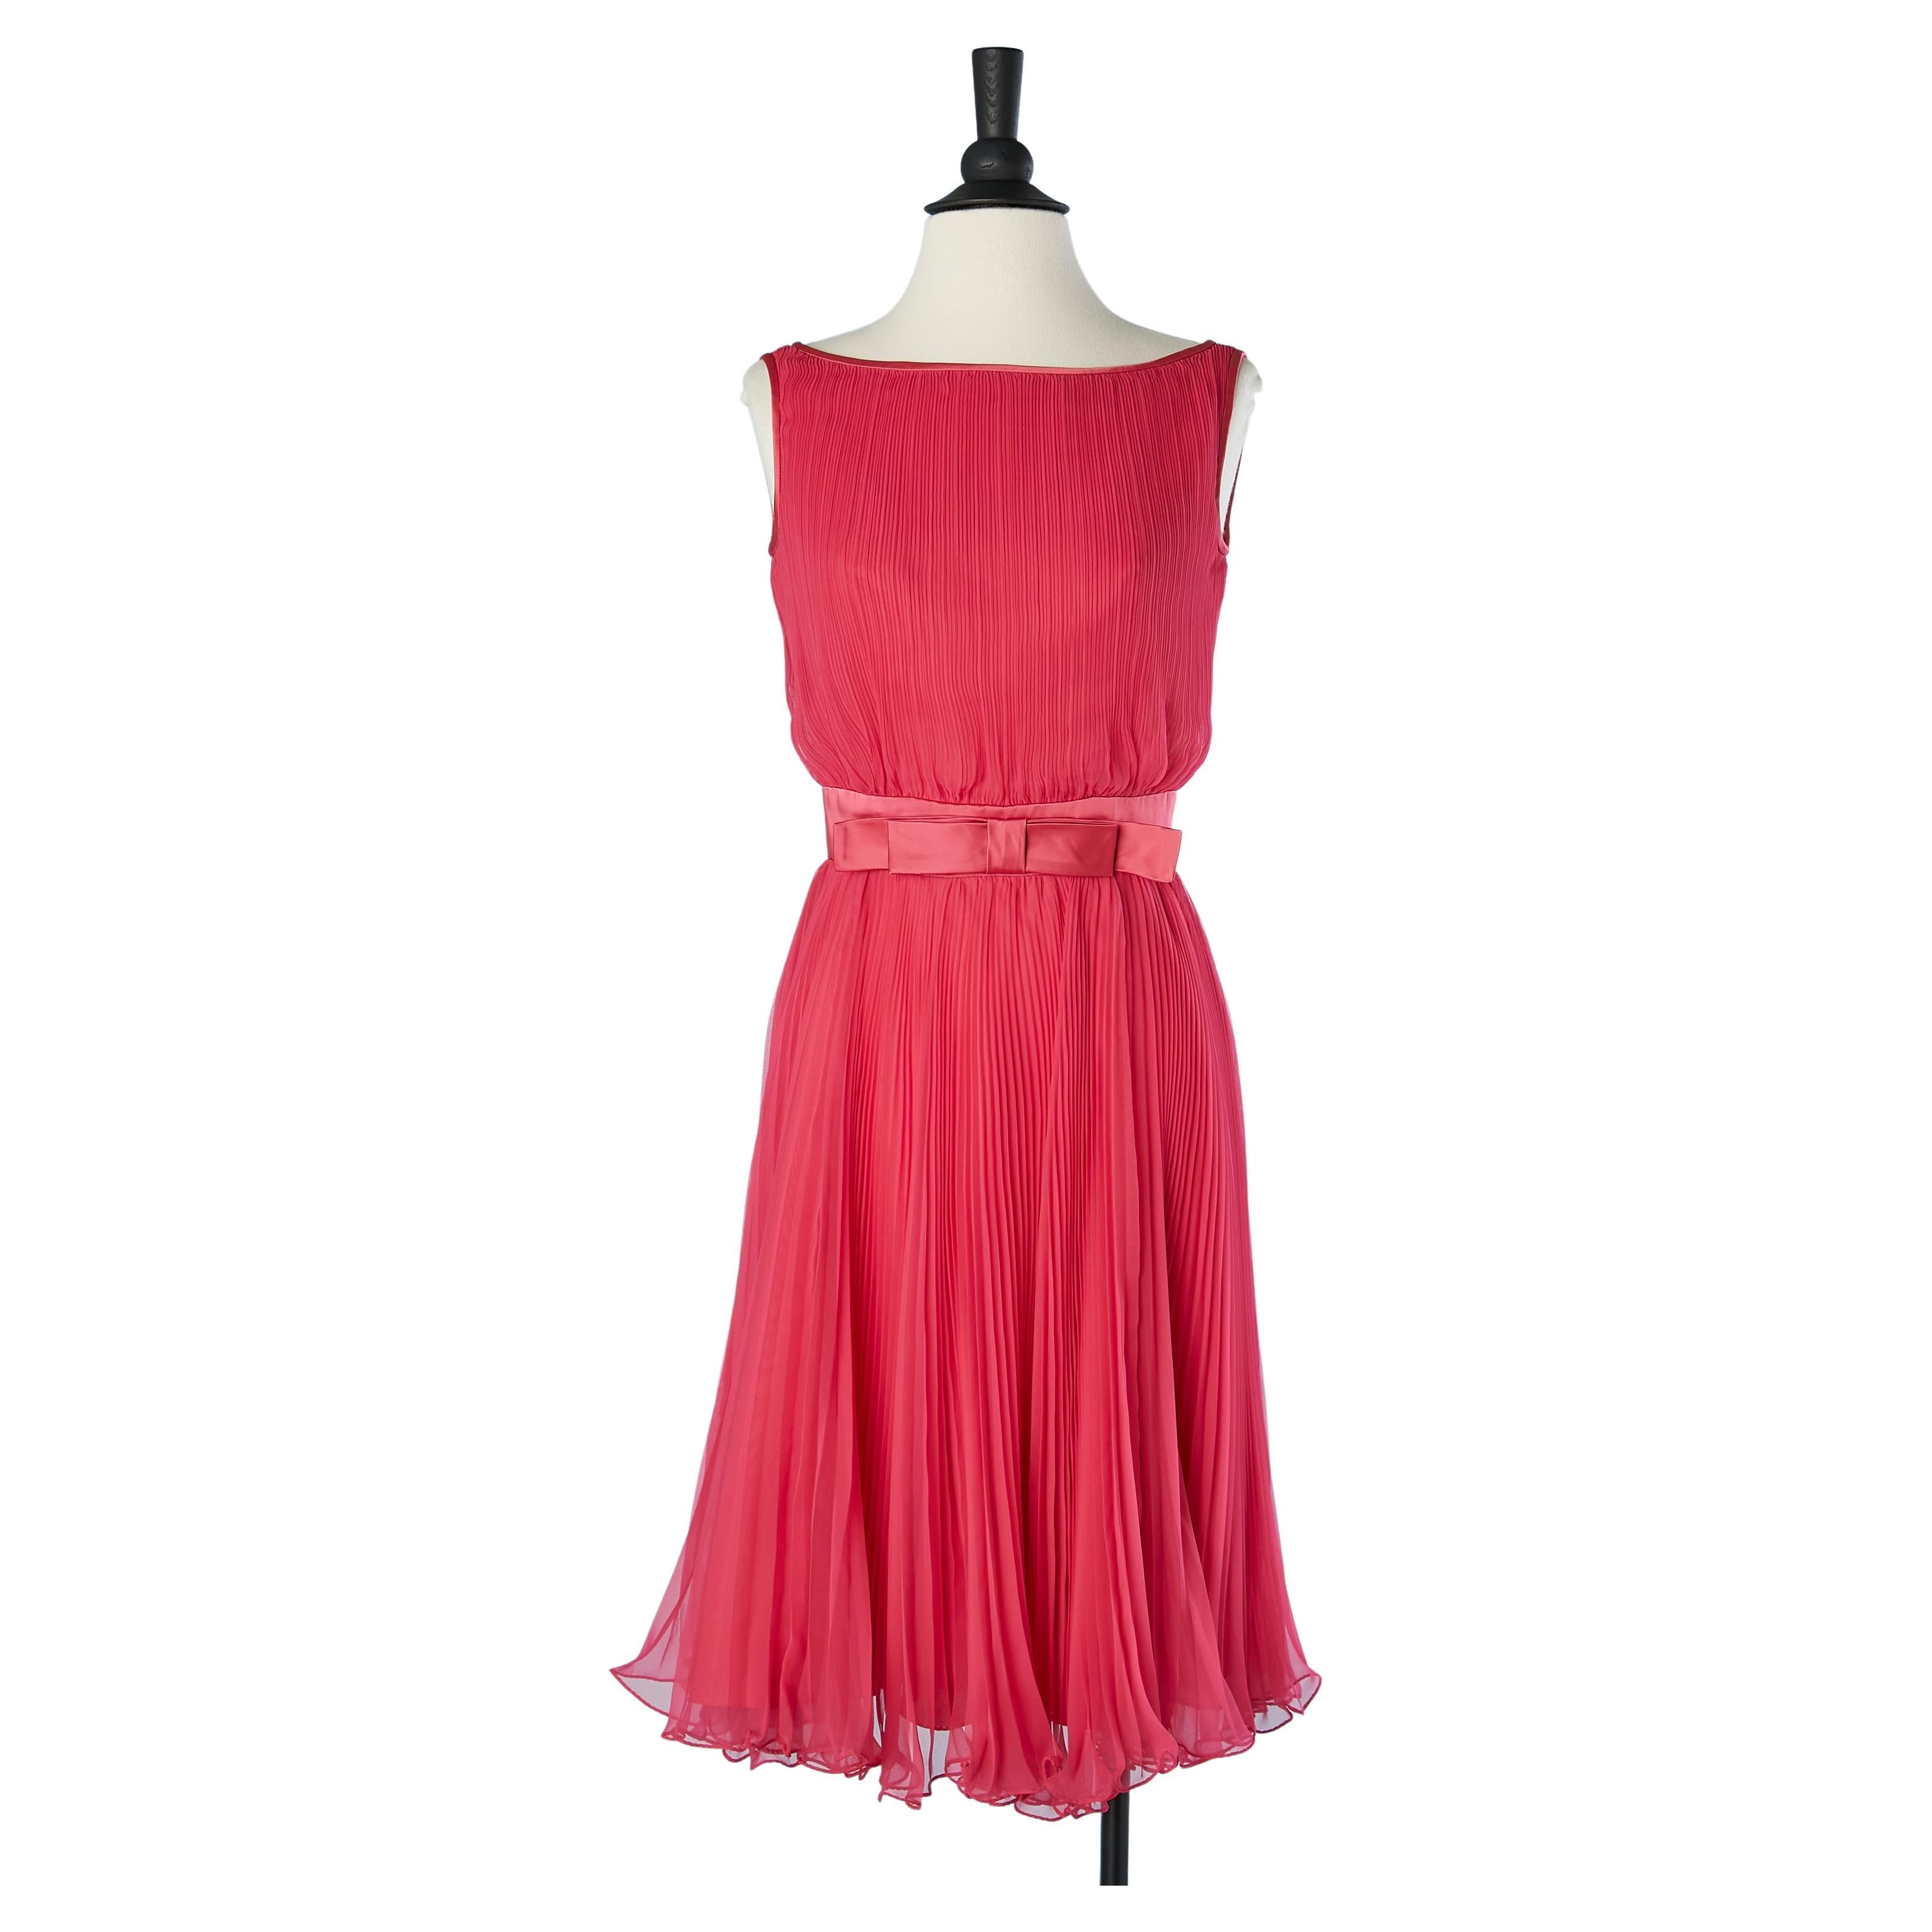 Sunray pleated pink cocktail dress with bow  Miss Eliette Circa 1960's  For Sale